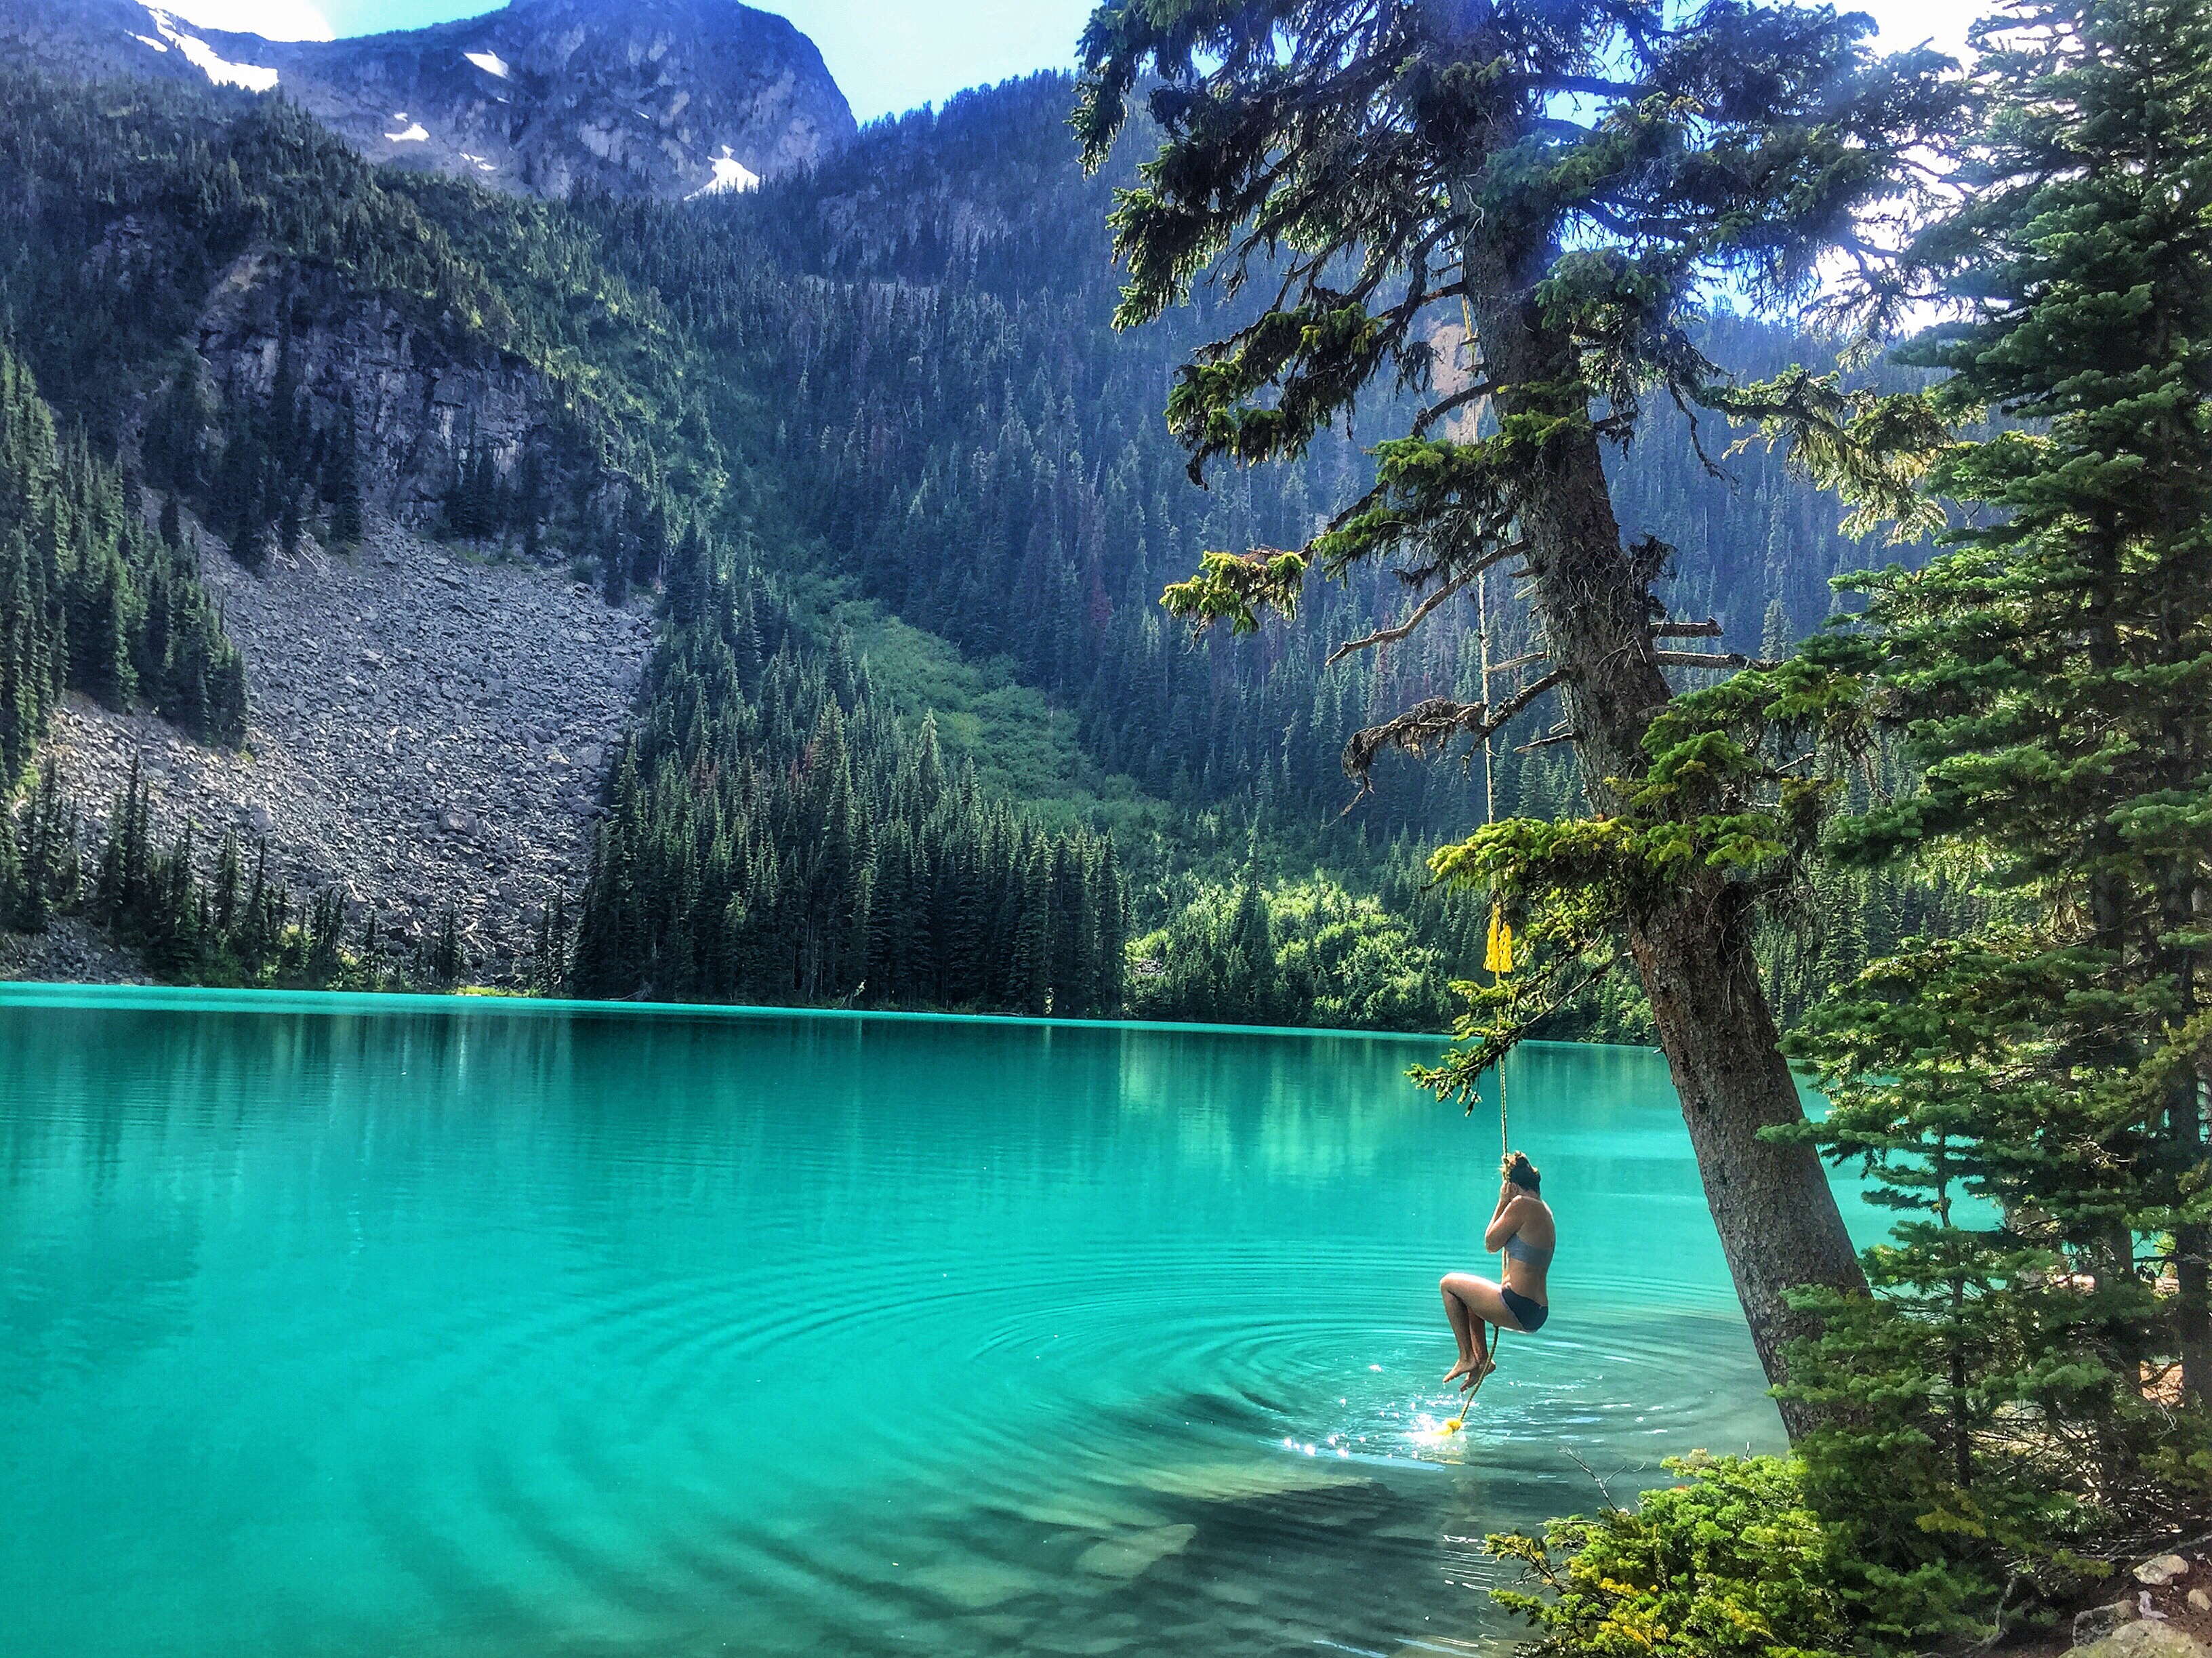 About 2.5 hours from Vancouver is the Joffre Lakes hike which takes about 3 hours round trip.